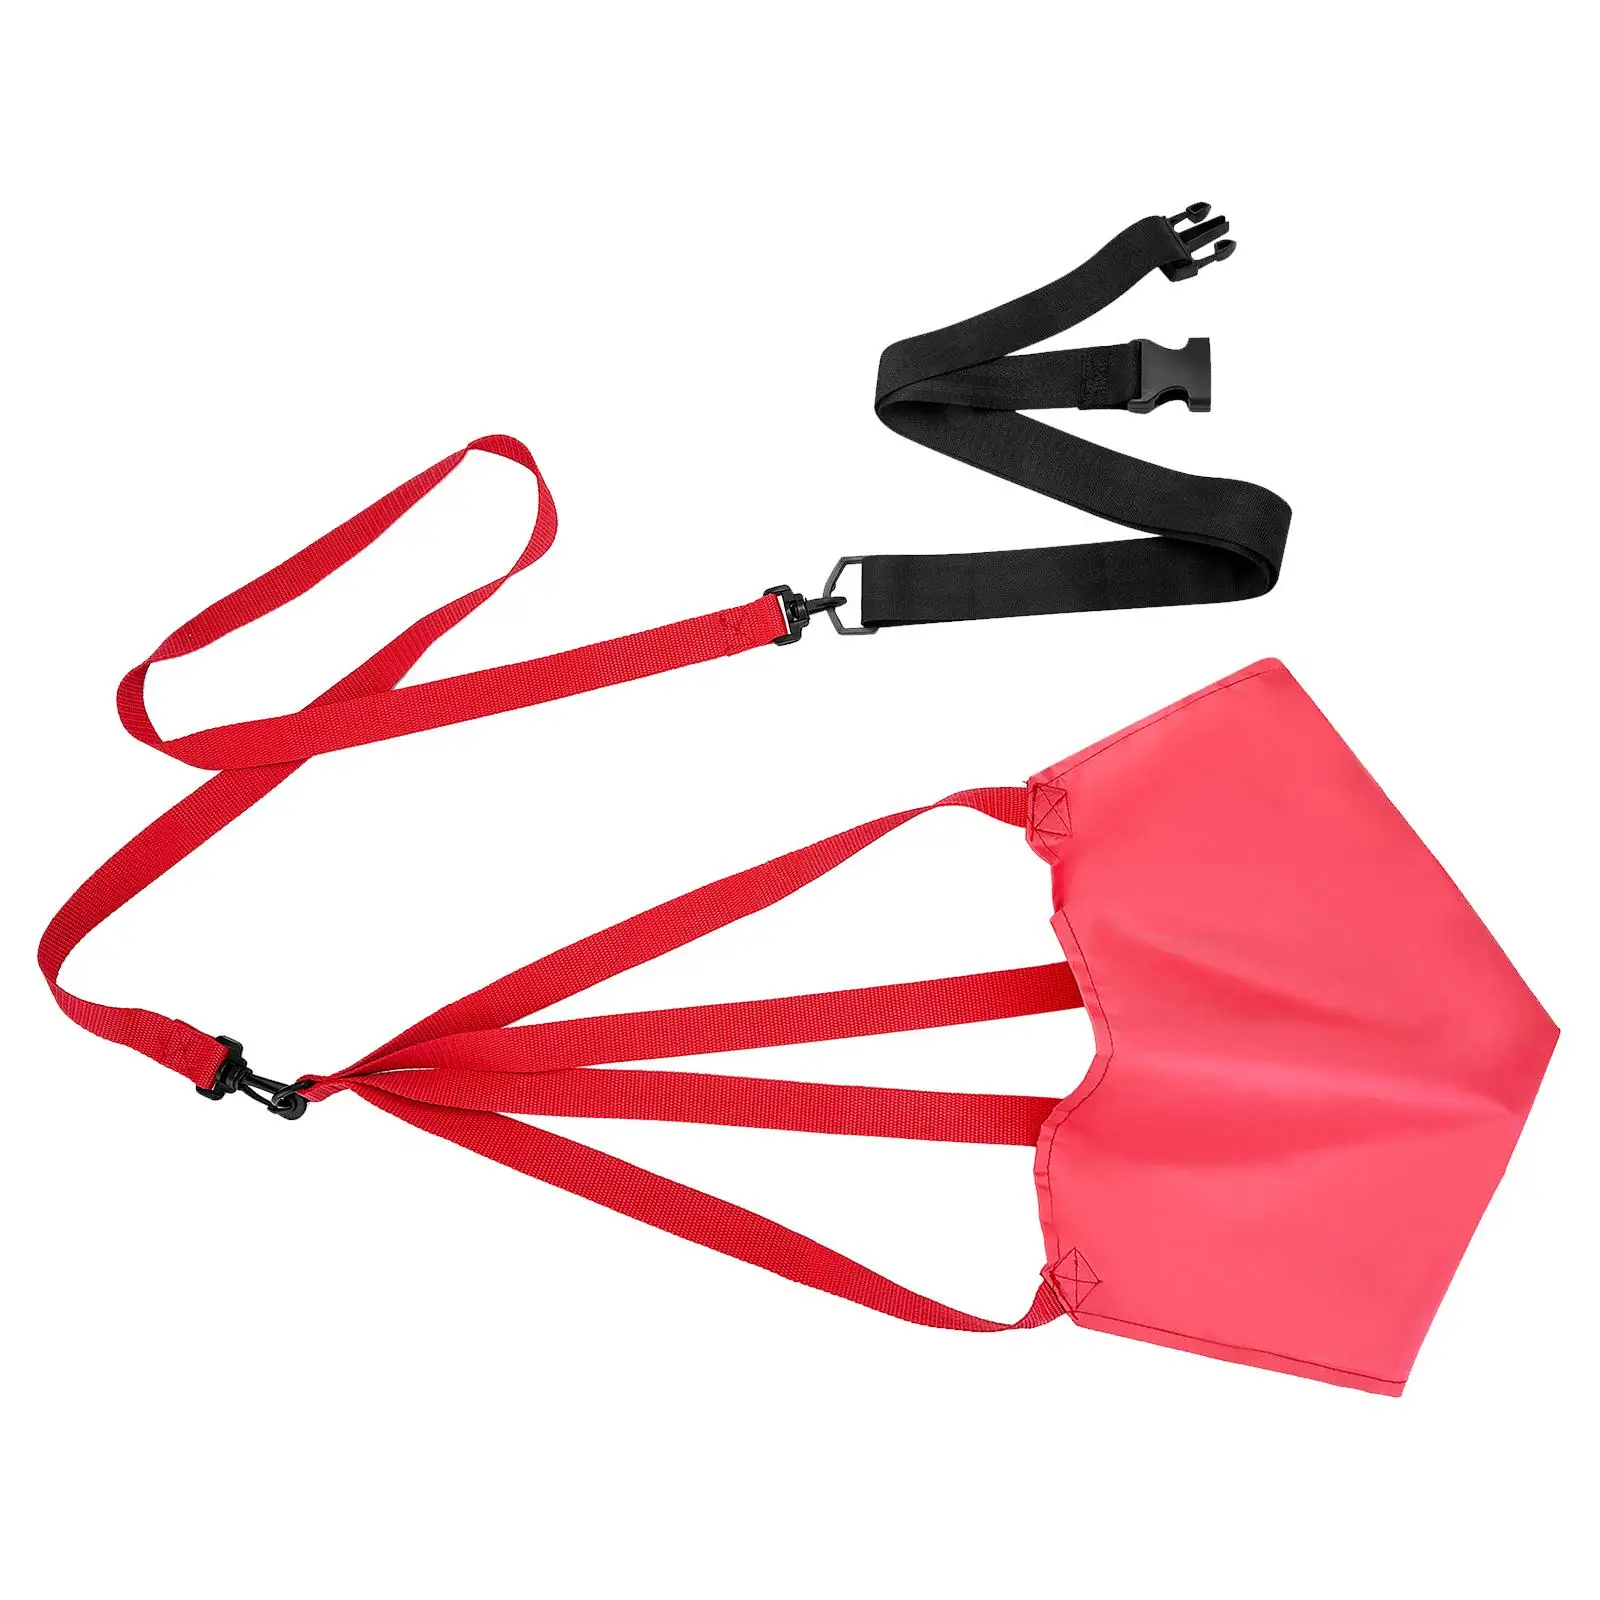 Swim Parachute Aids Speed Training Improves Strength Coordination Swimming Resistance Belt for Beginners